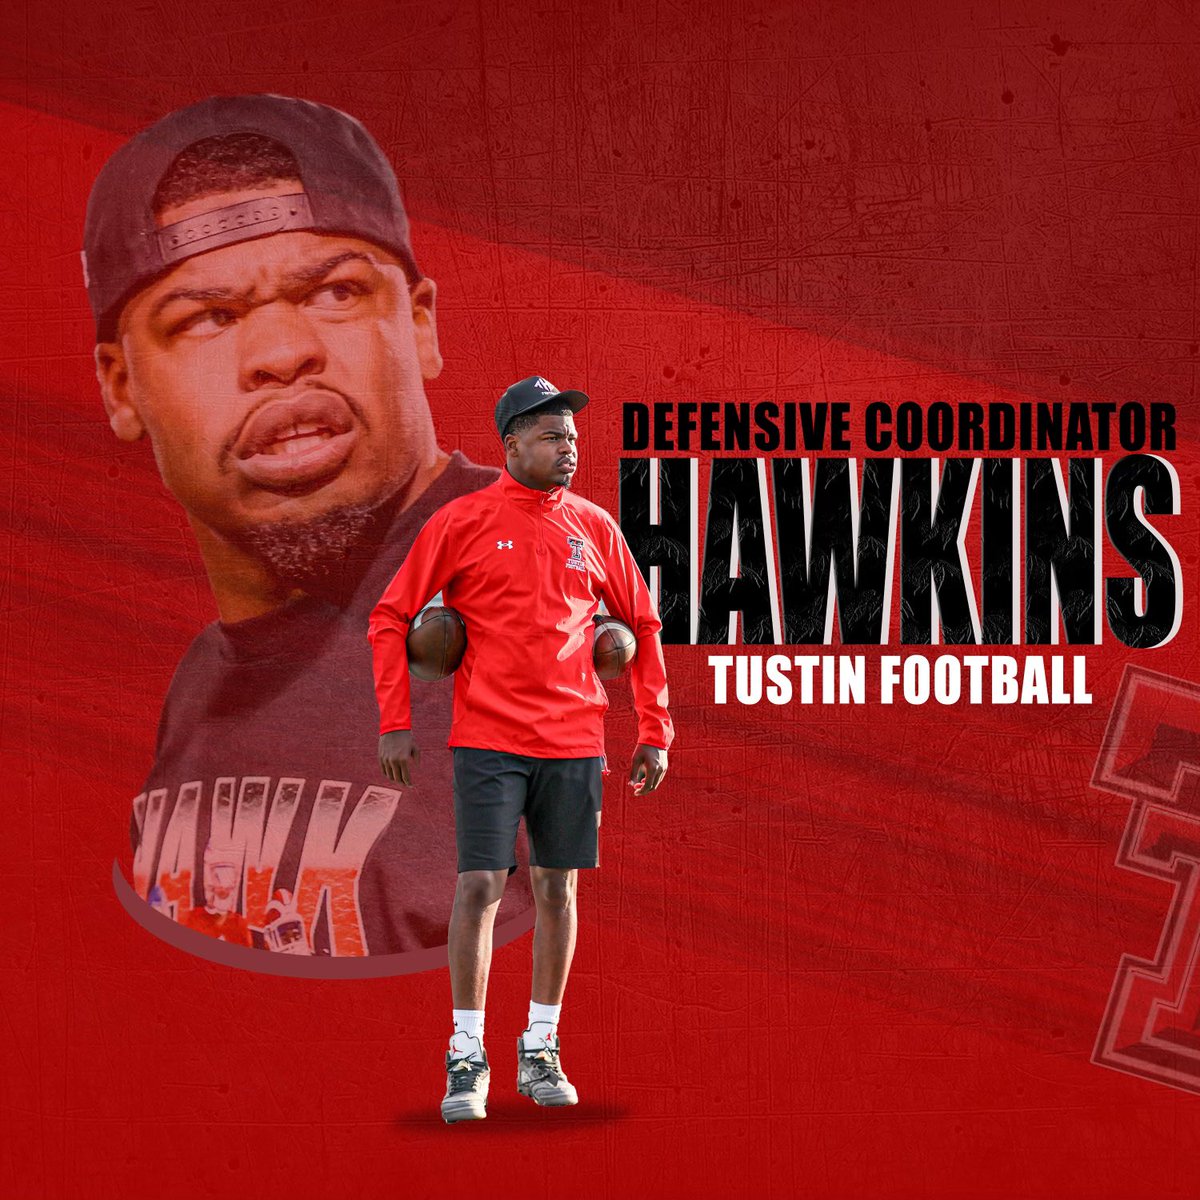 We are excited to announce that Coach Hawkins has been named our new Defensive Coordinator for the 2024 season. He will continue to bring valuable experience from playing and coaching at an elite level. We're thrilled to have hawk leading our defense! @CHawk_4 #TillerForLife